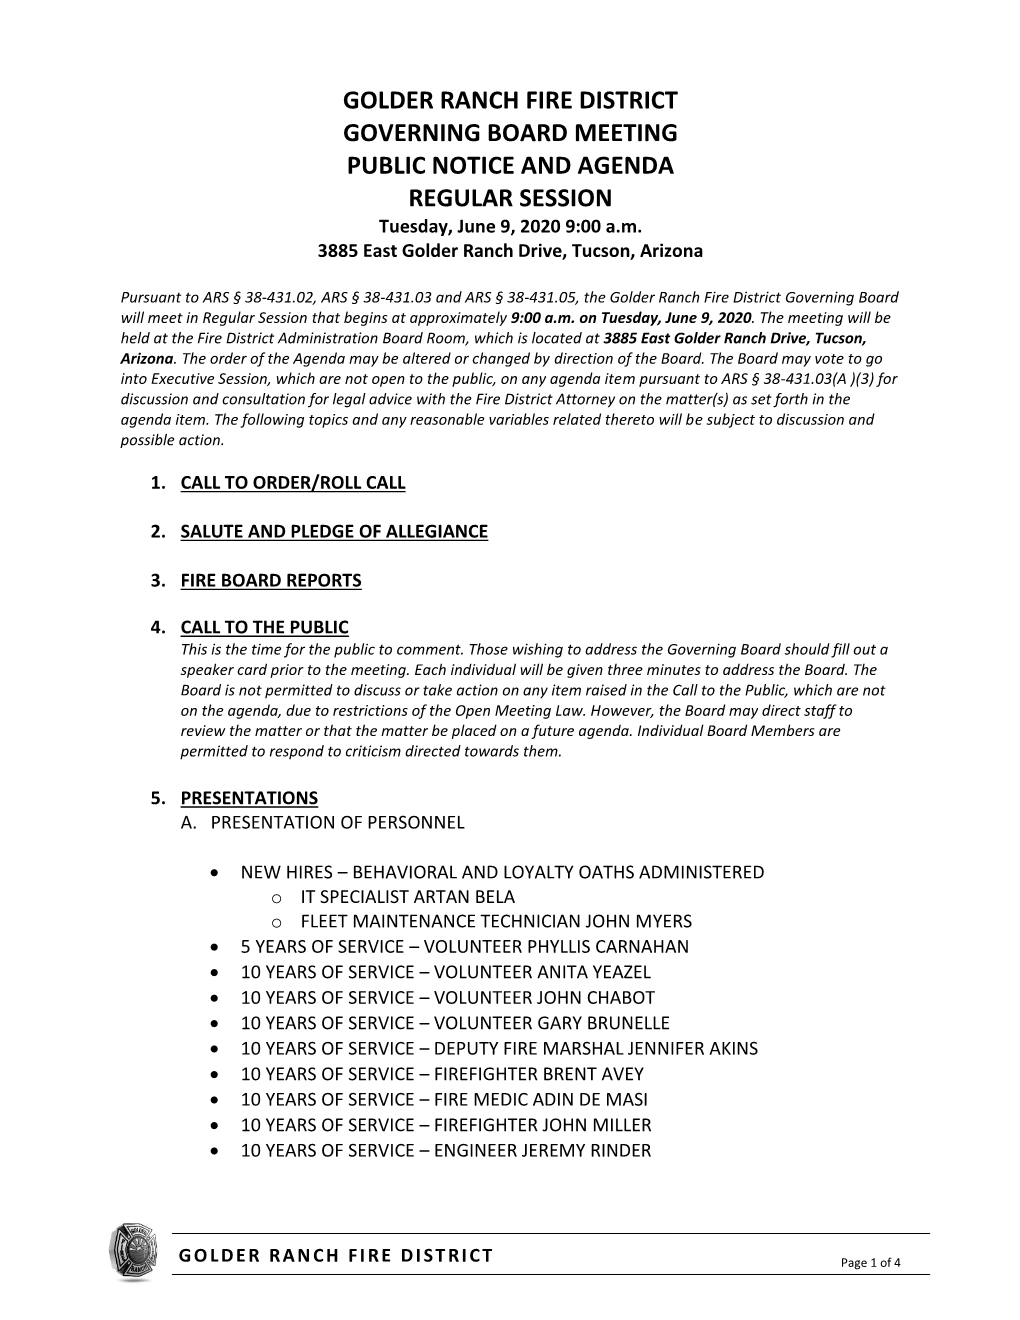 GOLDER RANCH FIRE DISTRICT GOVERNING BOARD MEETING PUBLIC NOTICE and AGENDA REGULAR SESSION Tuesday, June 9, 2020 9:00 A.M